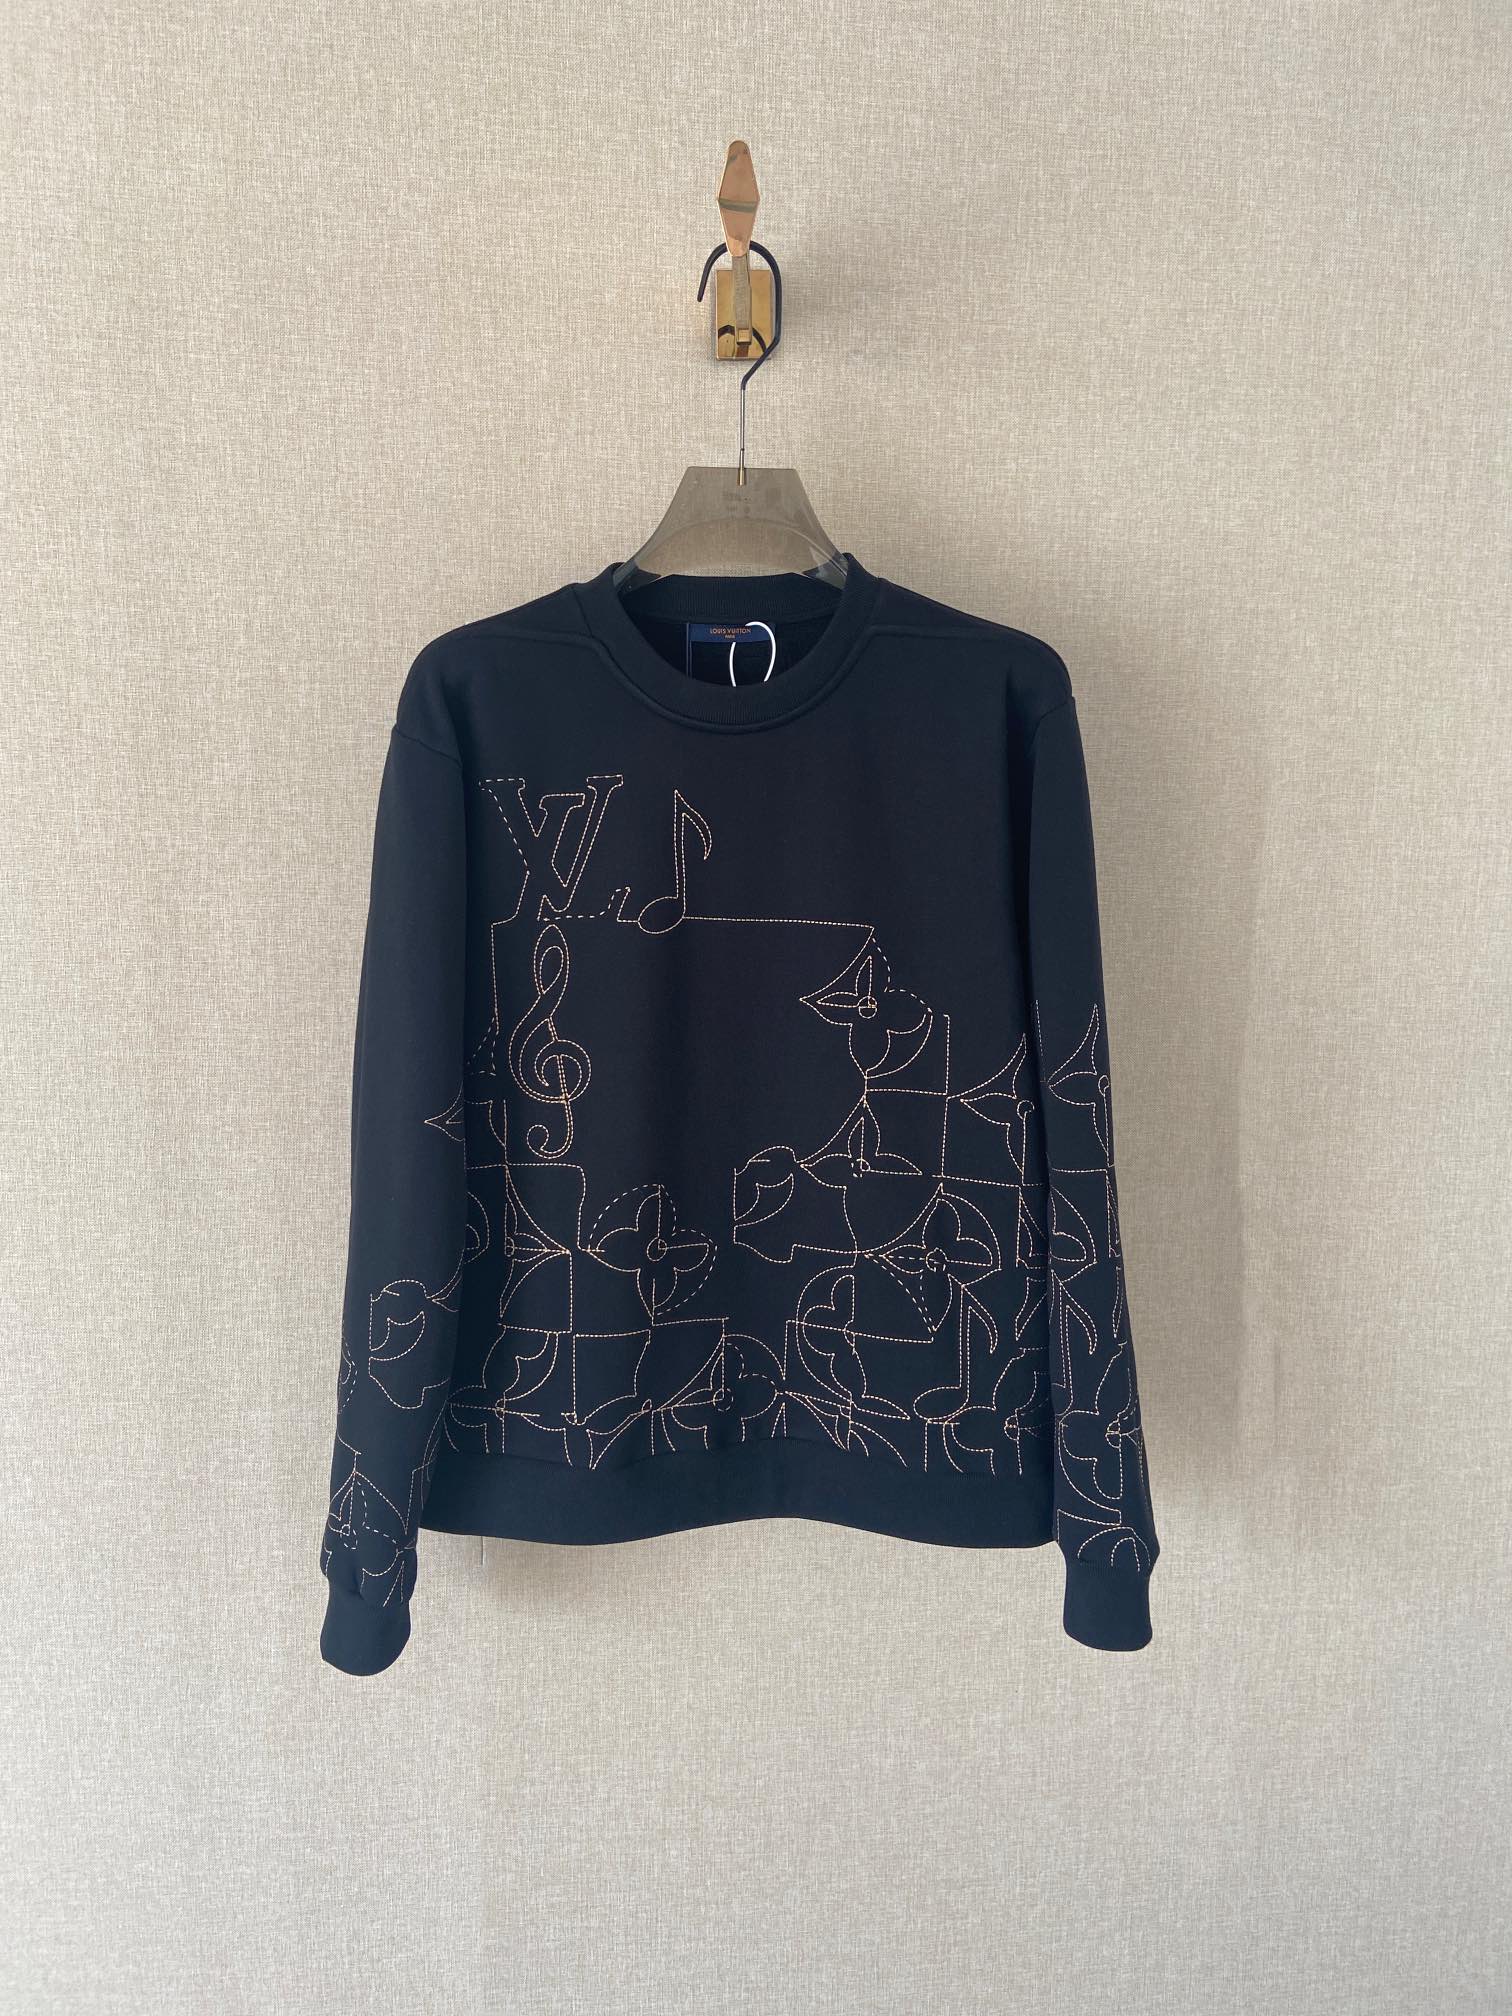 Louis Vuitton Clothing Sweatshirts Online From China Designer
 Embroidery Unisex